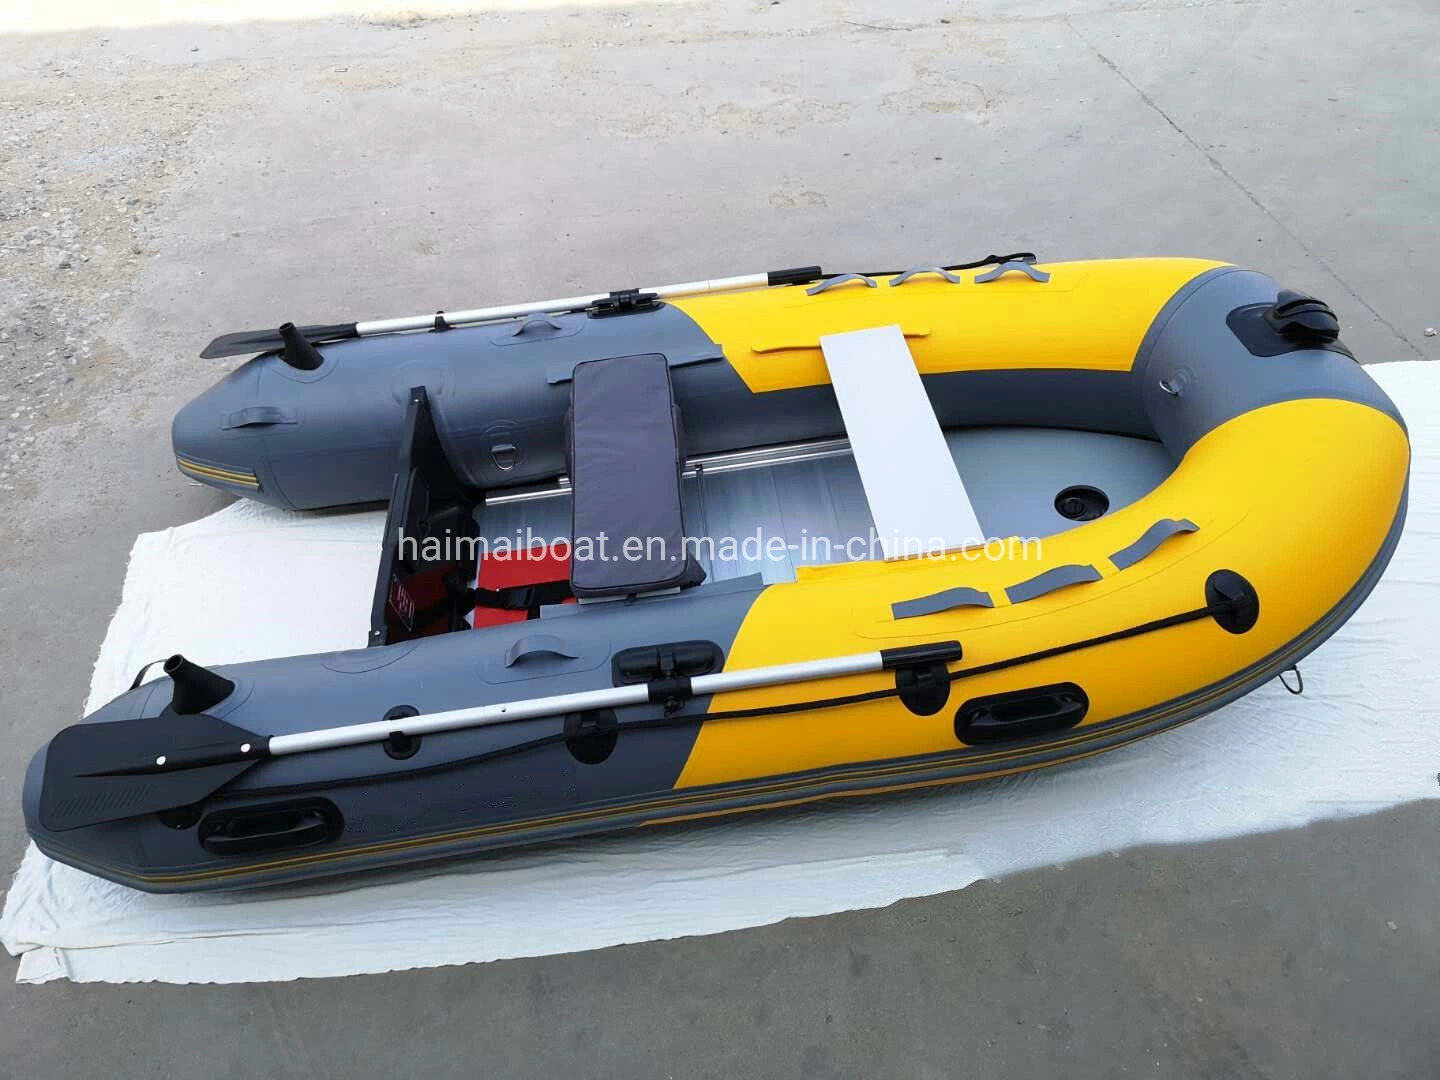 China Hot Sale Boat Style 8.8FT 2.7m Hypalon Heytex Mehler PVC Inflatable Boat with Aluminum Floor Coastwise Cruiser Boat Fishing Dinghy Ferry Boat Rowing Boat